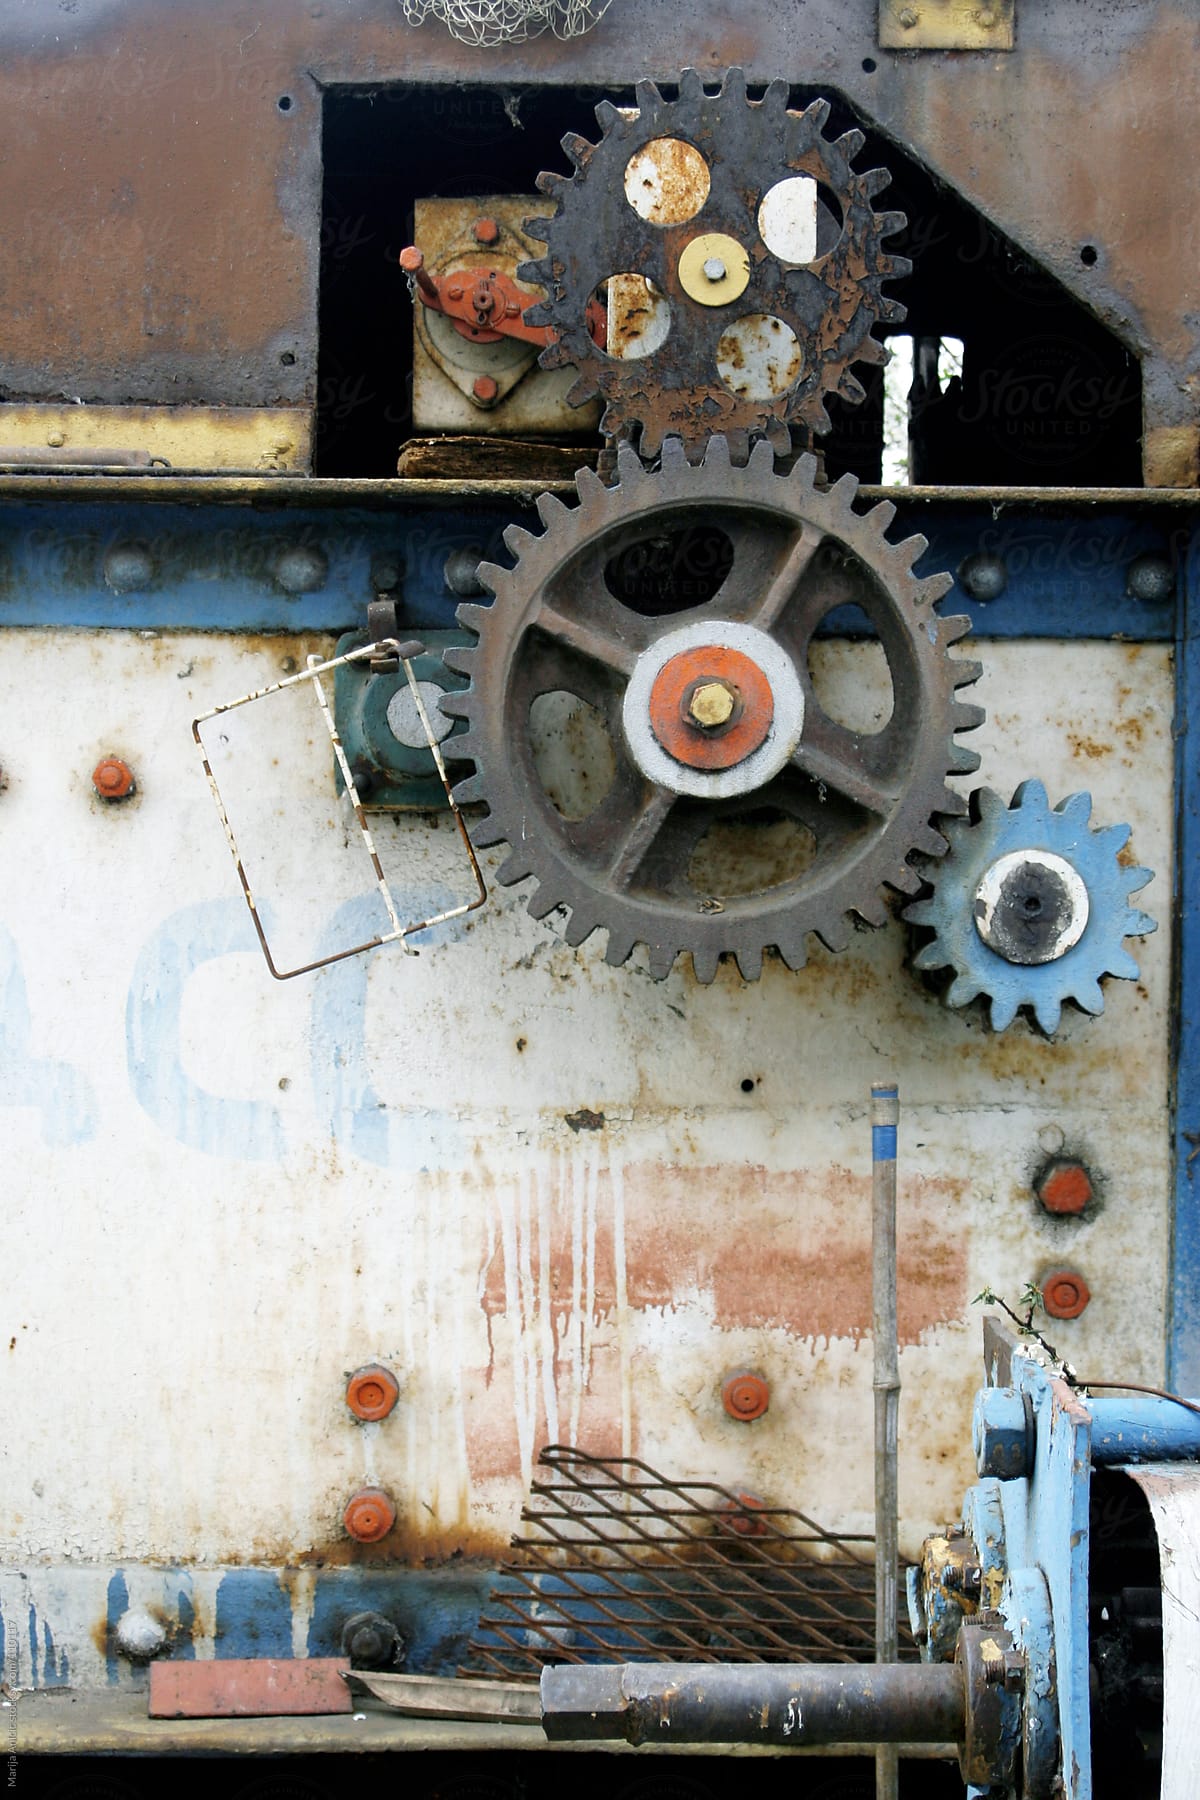 Mechanism with gears,screws and nails